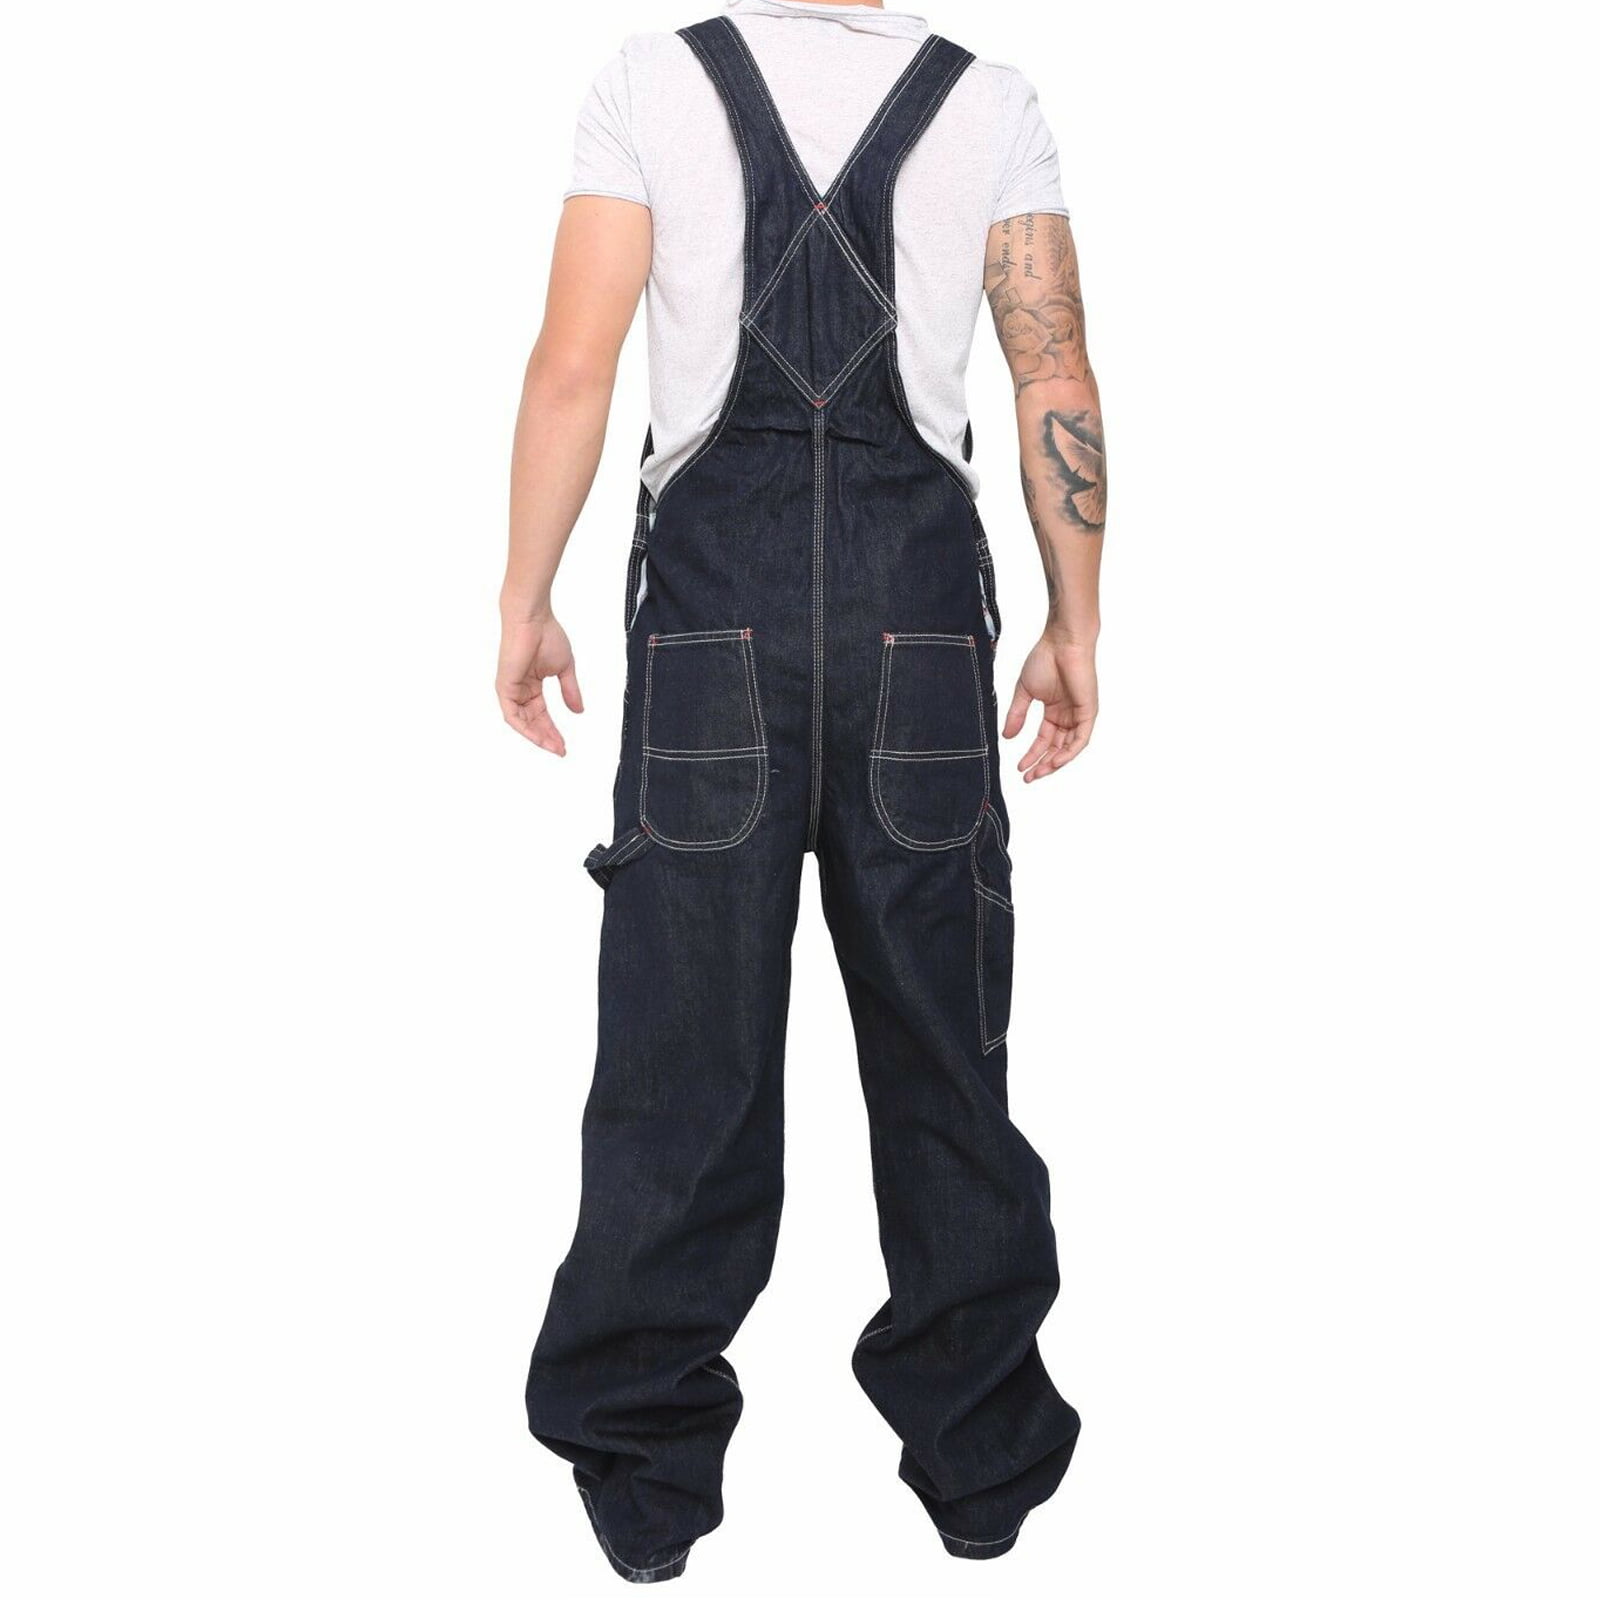 LASPERAL Mens Denim Dungarees Jeans Bib and Brace Overall Pro Workwear Pants Combat Cargo Jumpsuits 